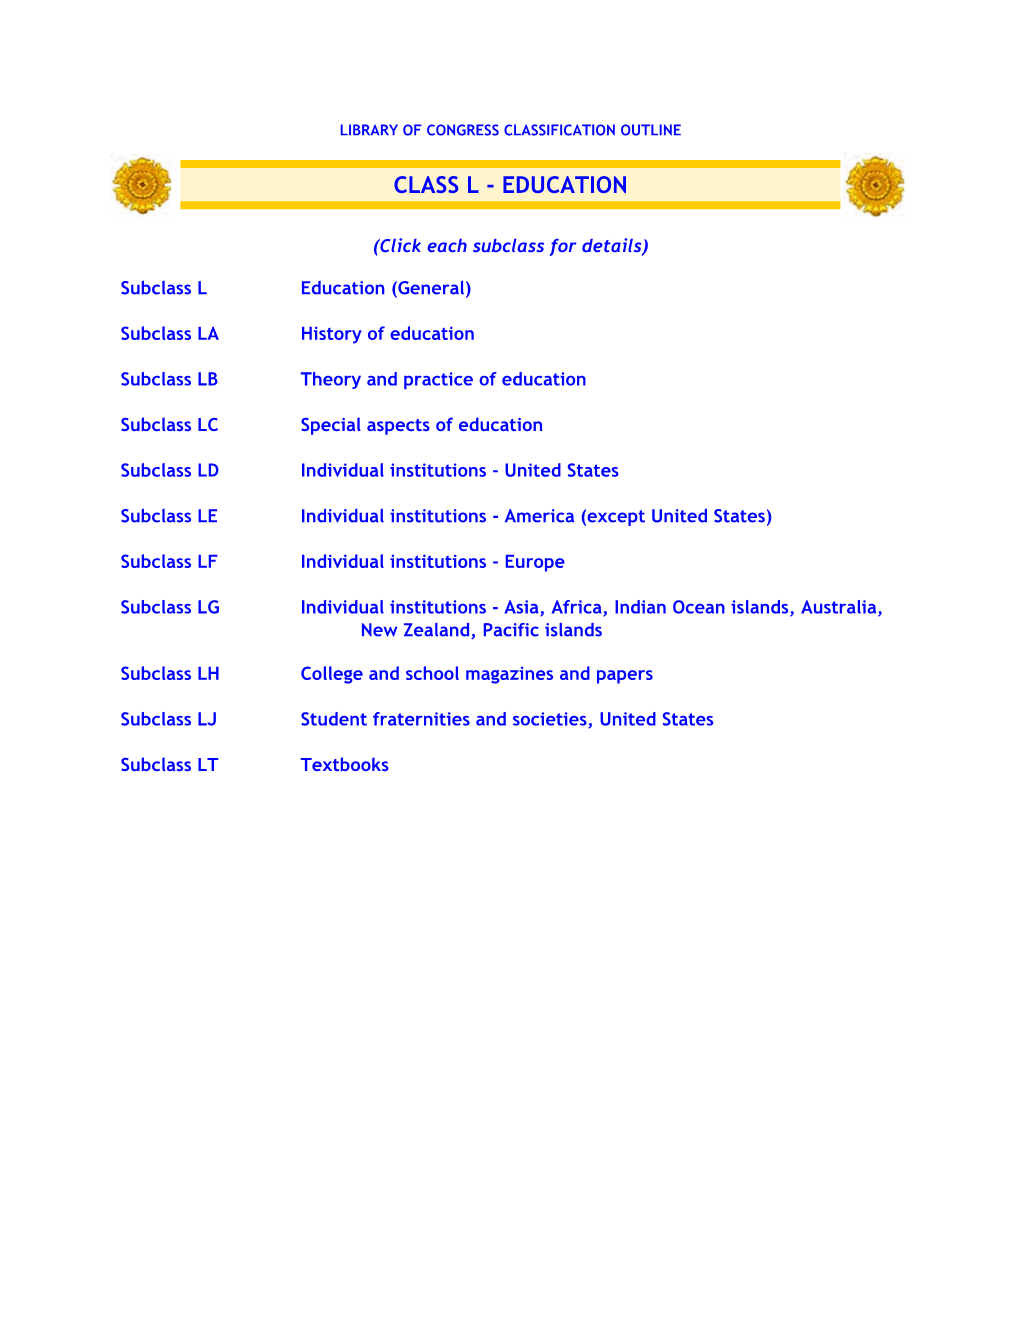 Library of Congress Classification Outline: Class L